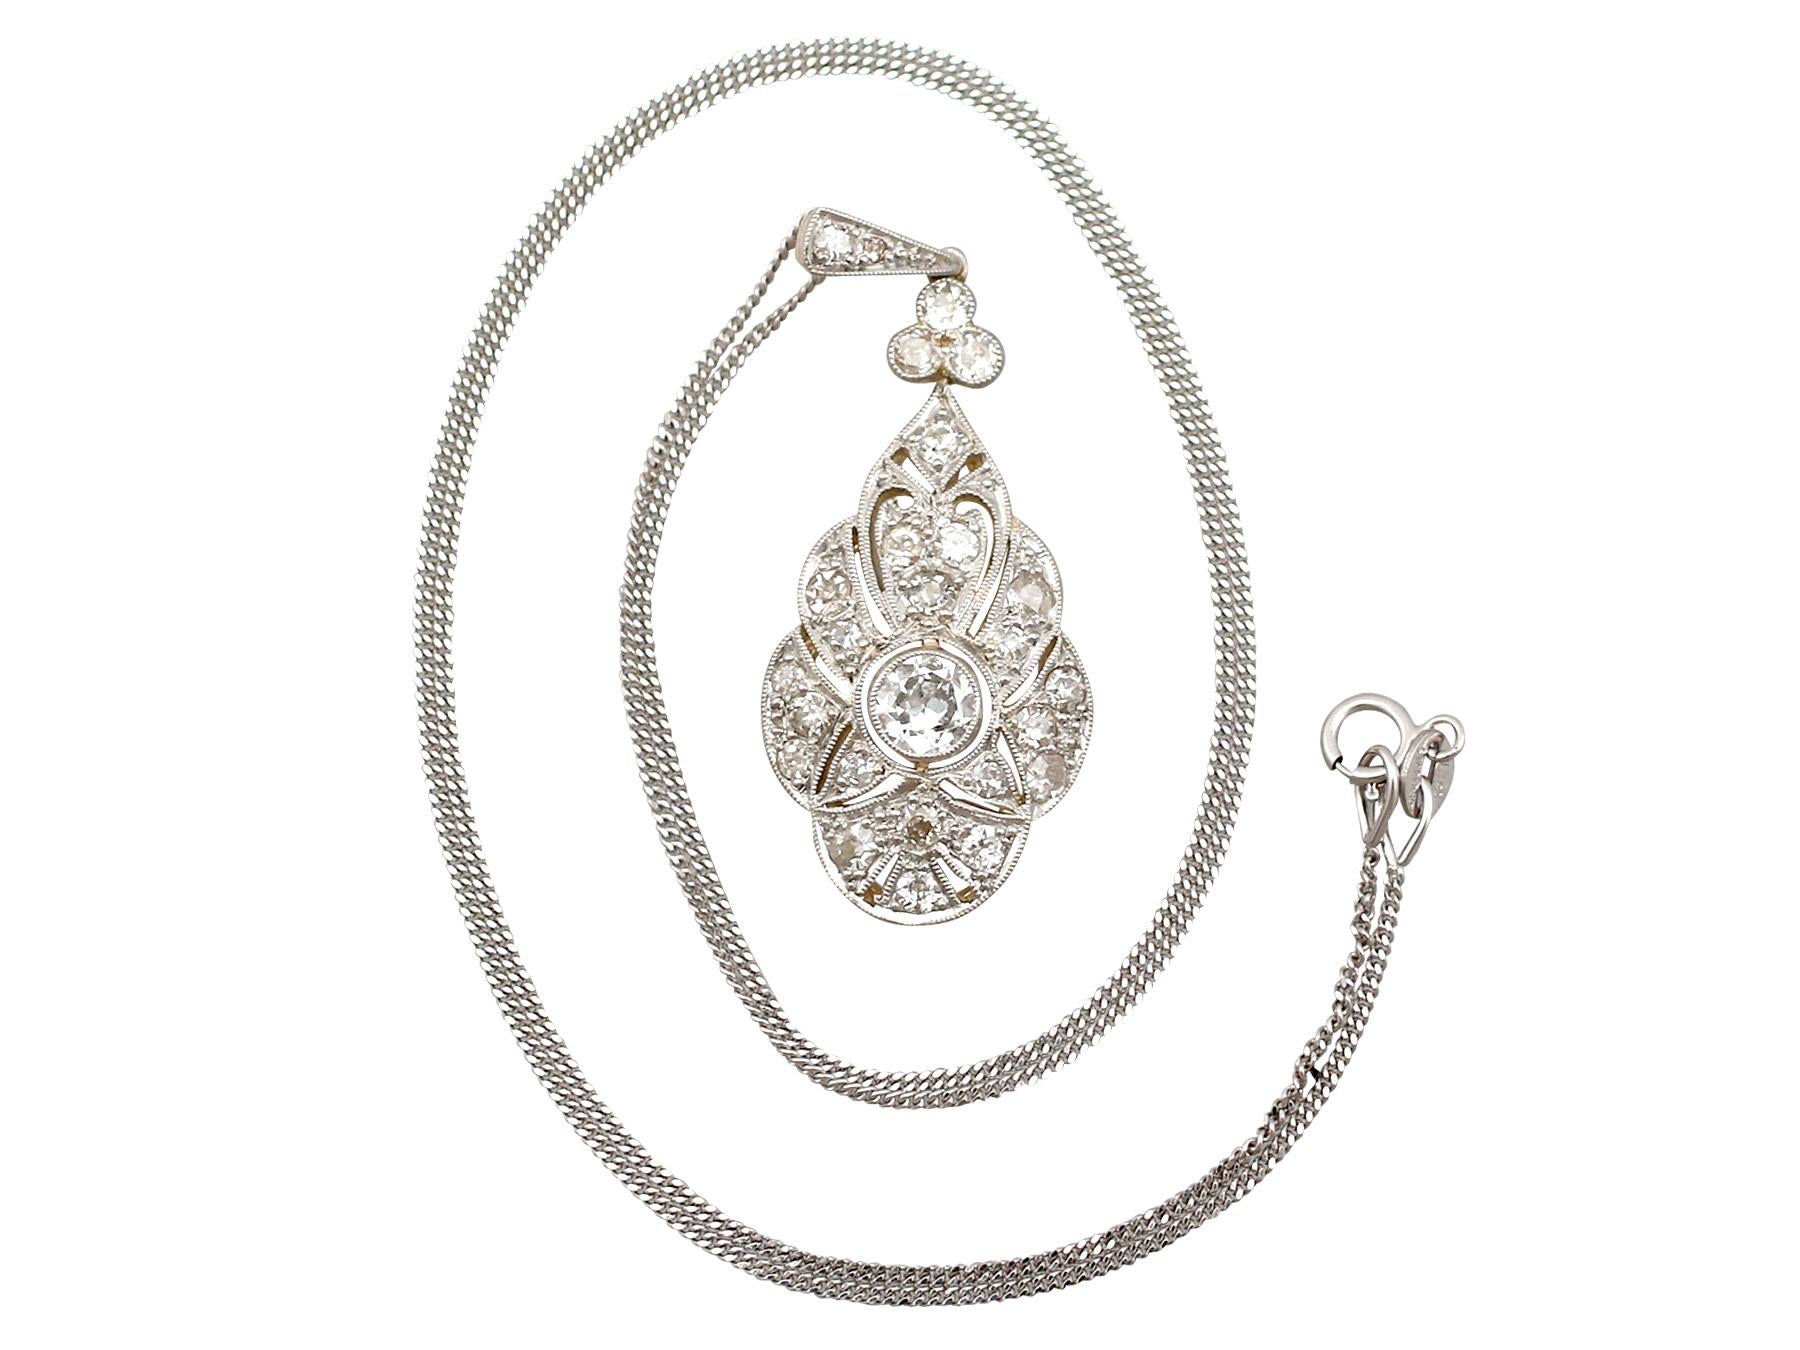 A stunning antique Art Deco 0.98 Ct diamond and 14 carat yellow gold, platinum set pendant and chain; part of our diverse antique jewellery and estate jewellery collections

This stunning, fine and impressive 1920's diamond pendant has been crafted